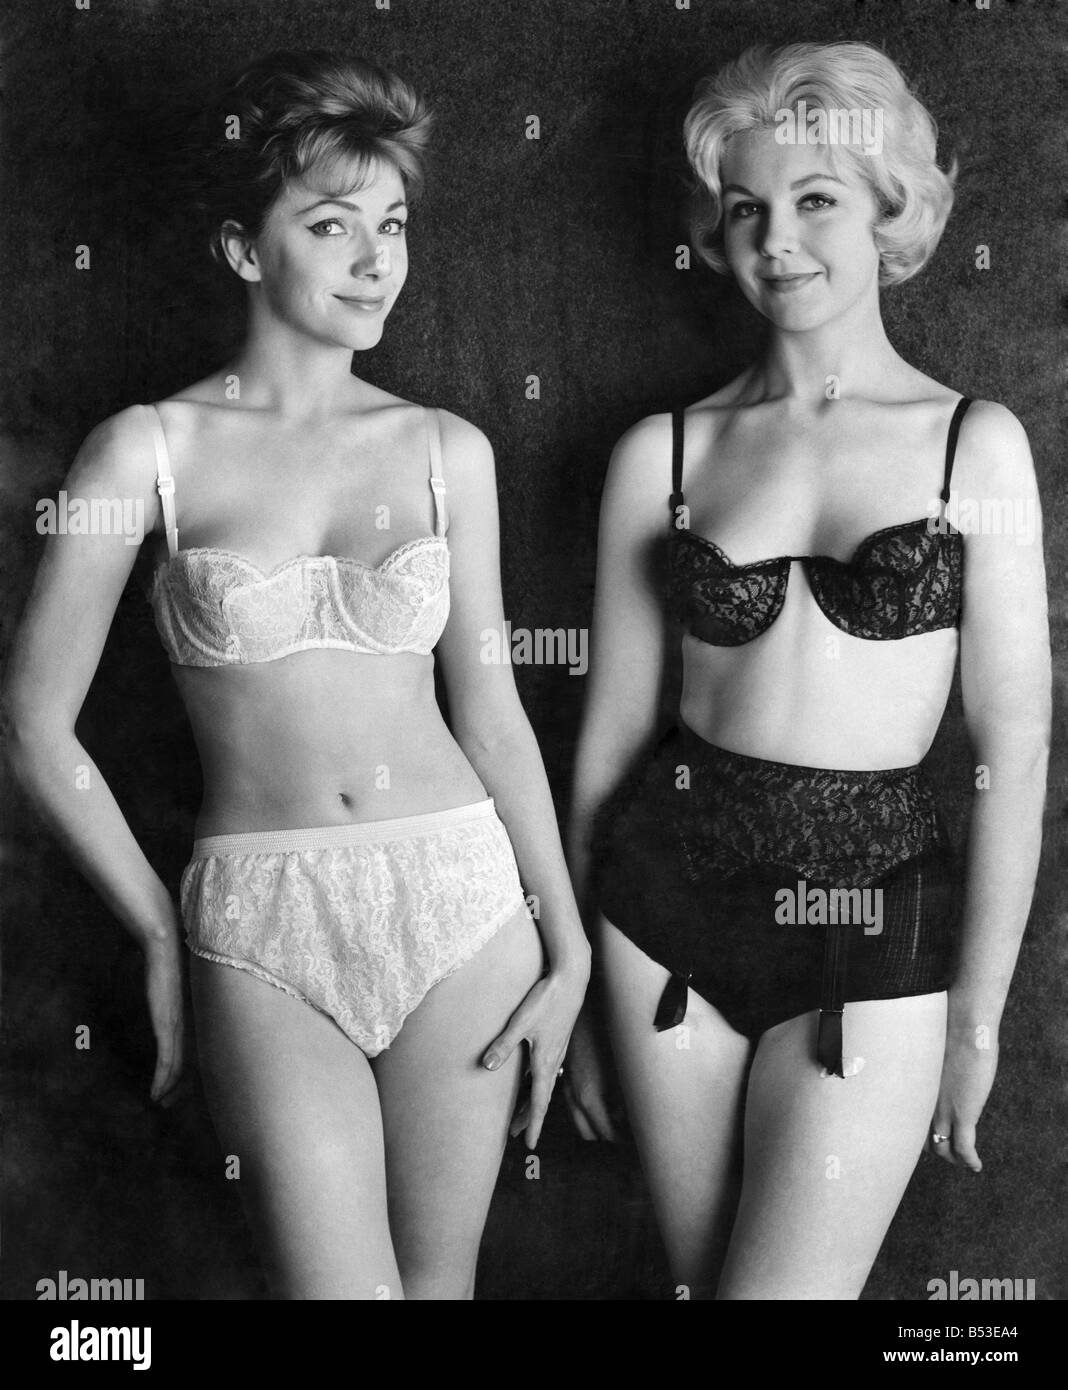 Women wearing matching bra and knickers in opposite colours.
June  1959 
P018247 Stock Photo - Alamy